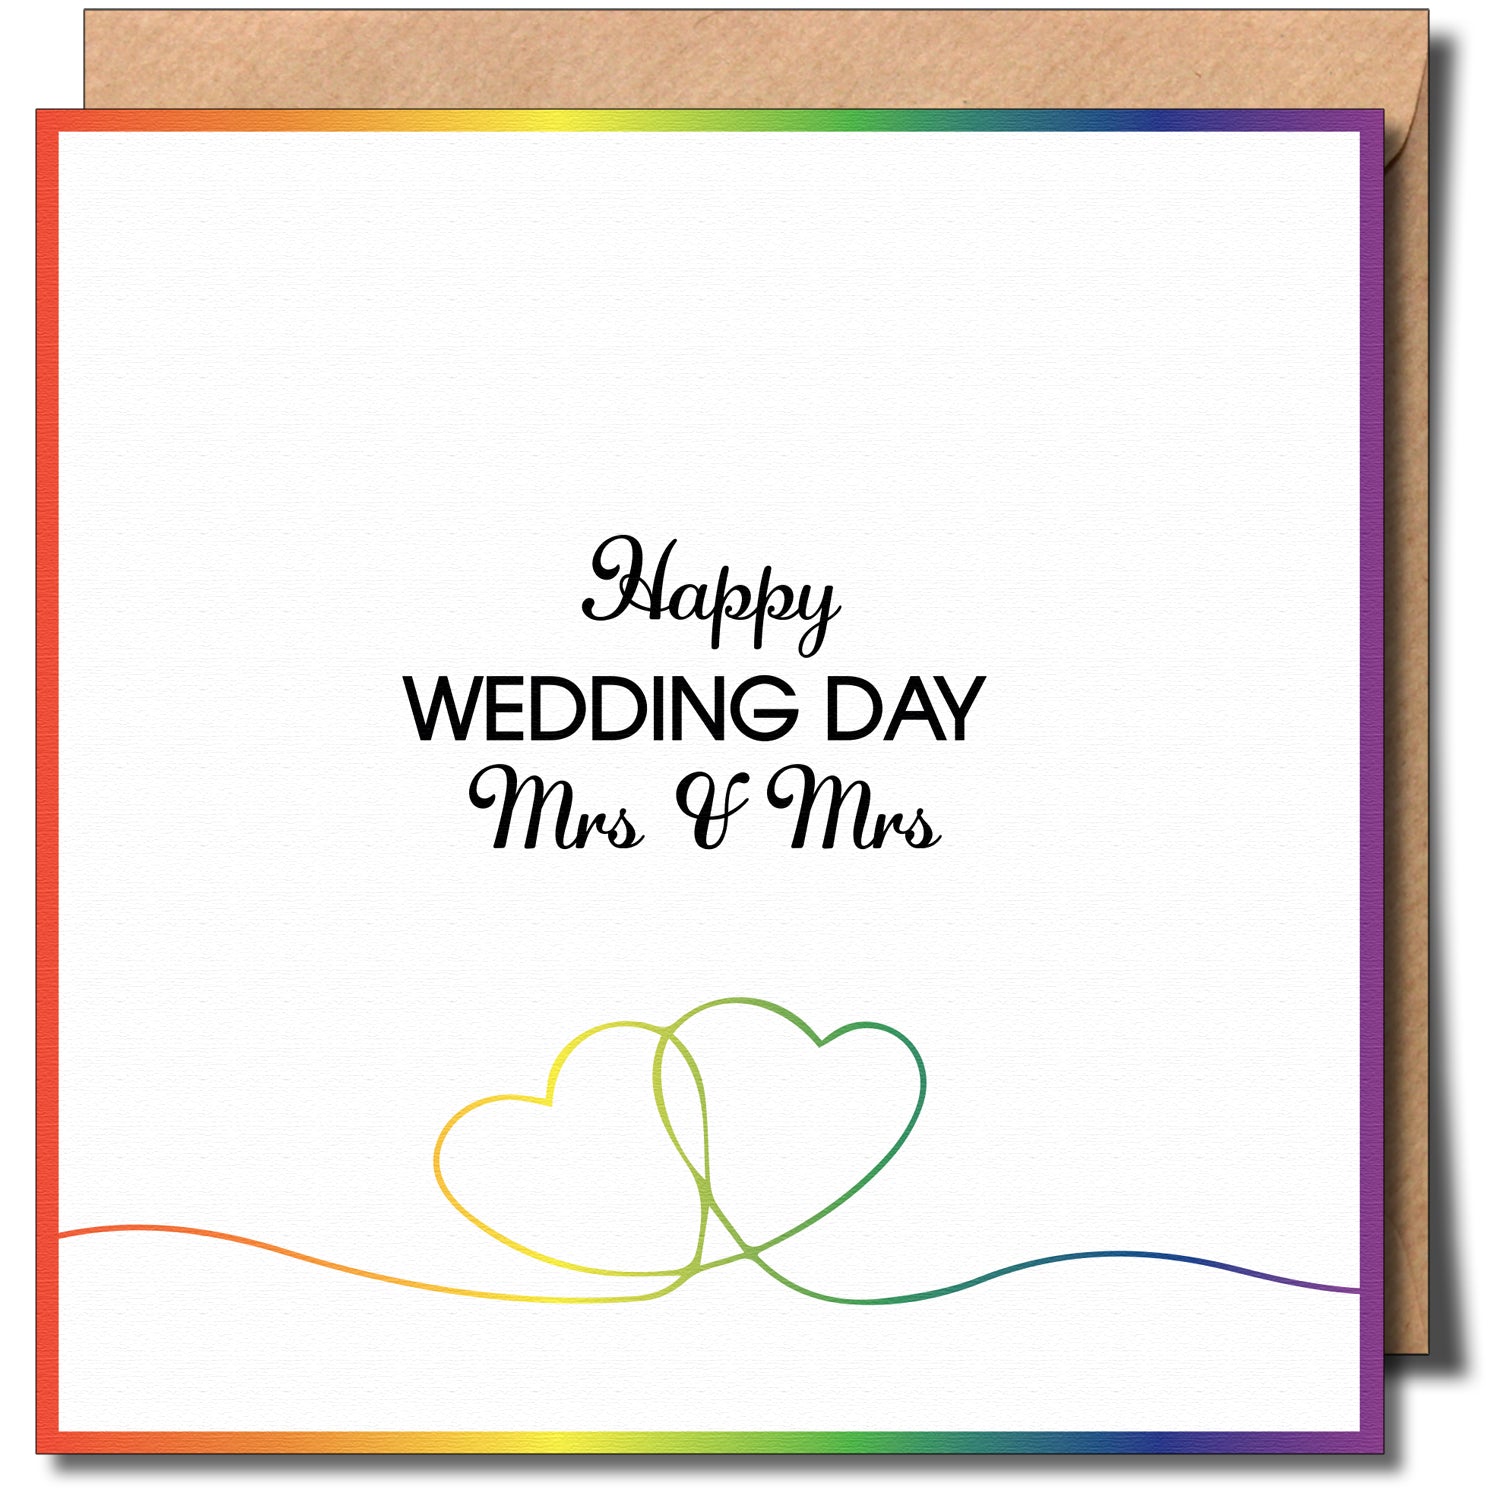 Mrs and Mrs greeting card